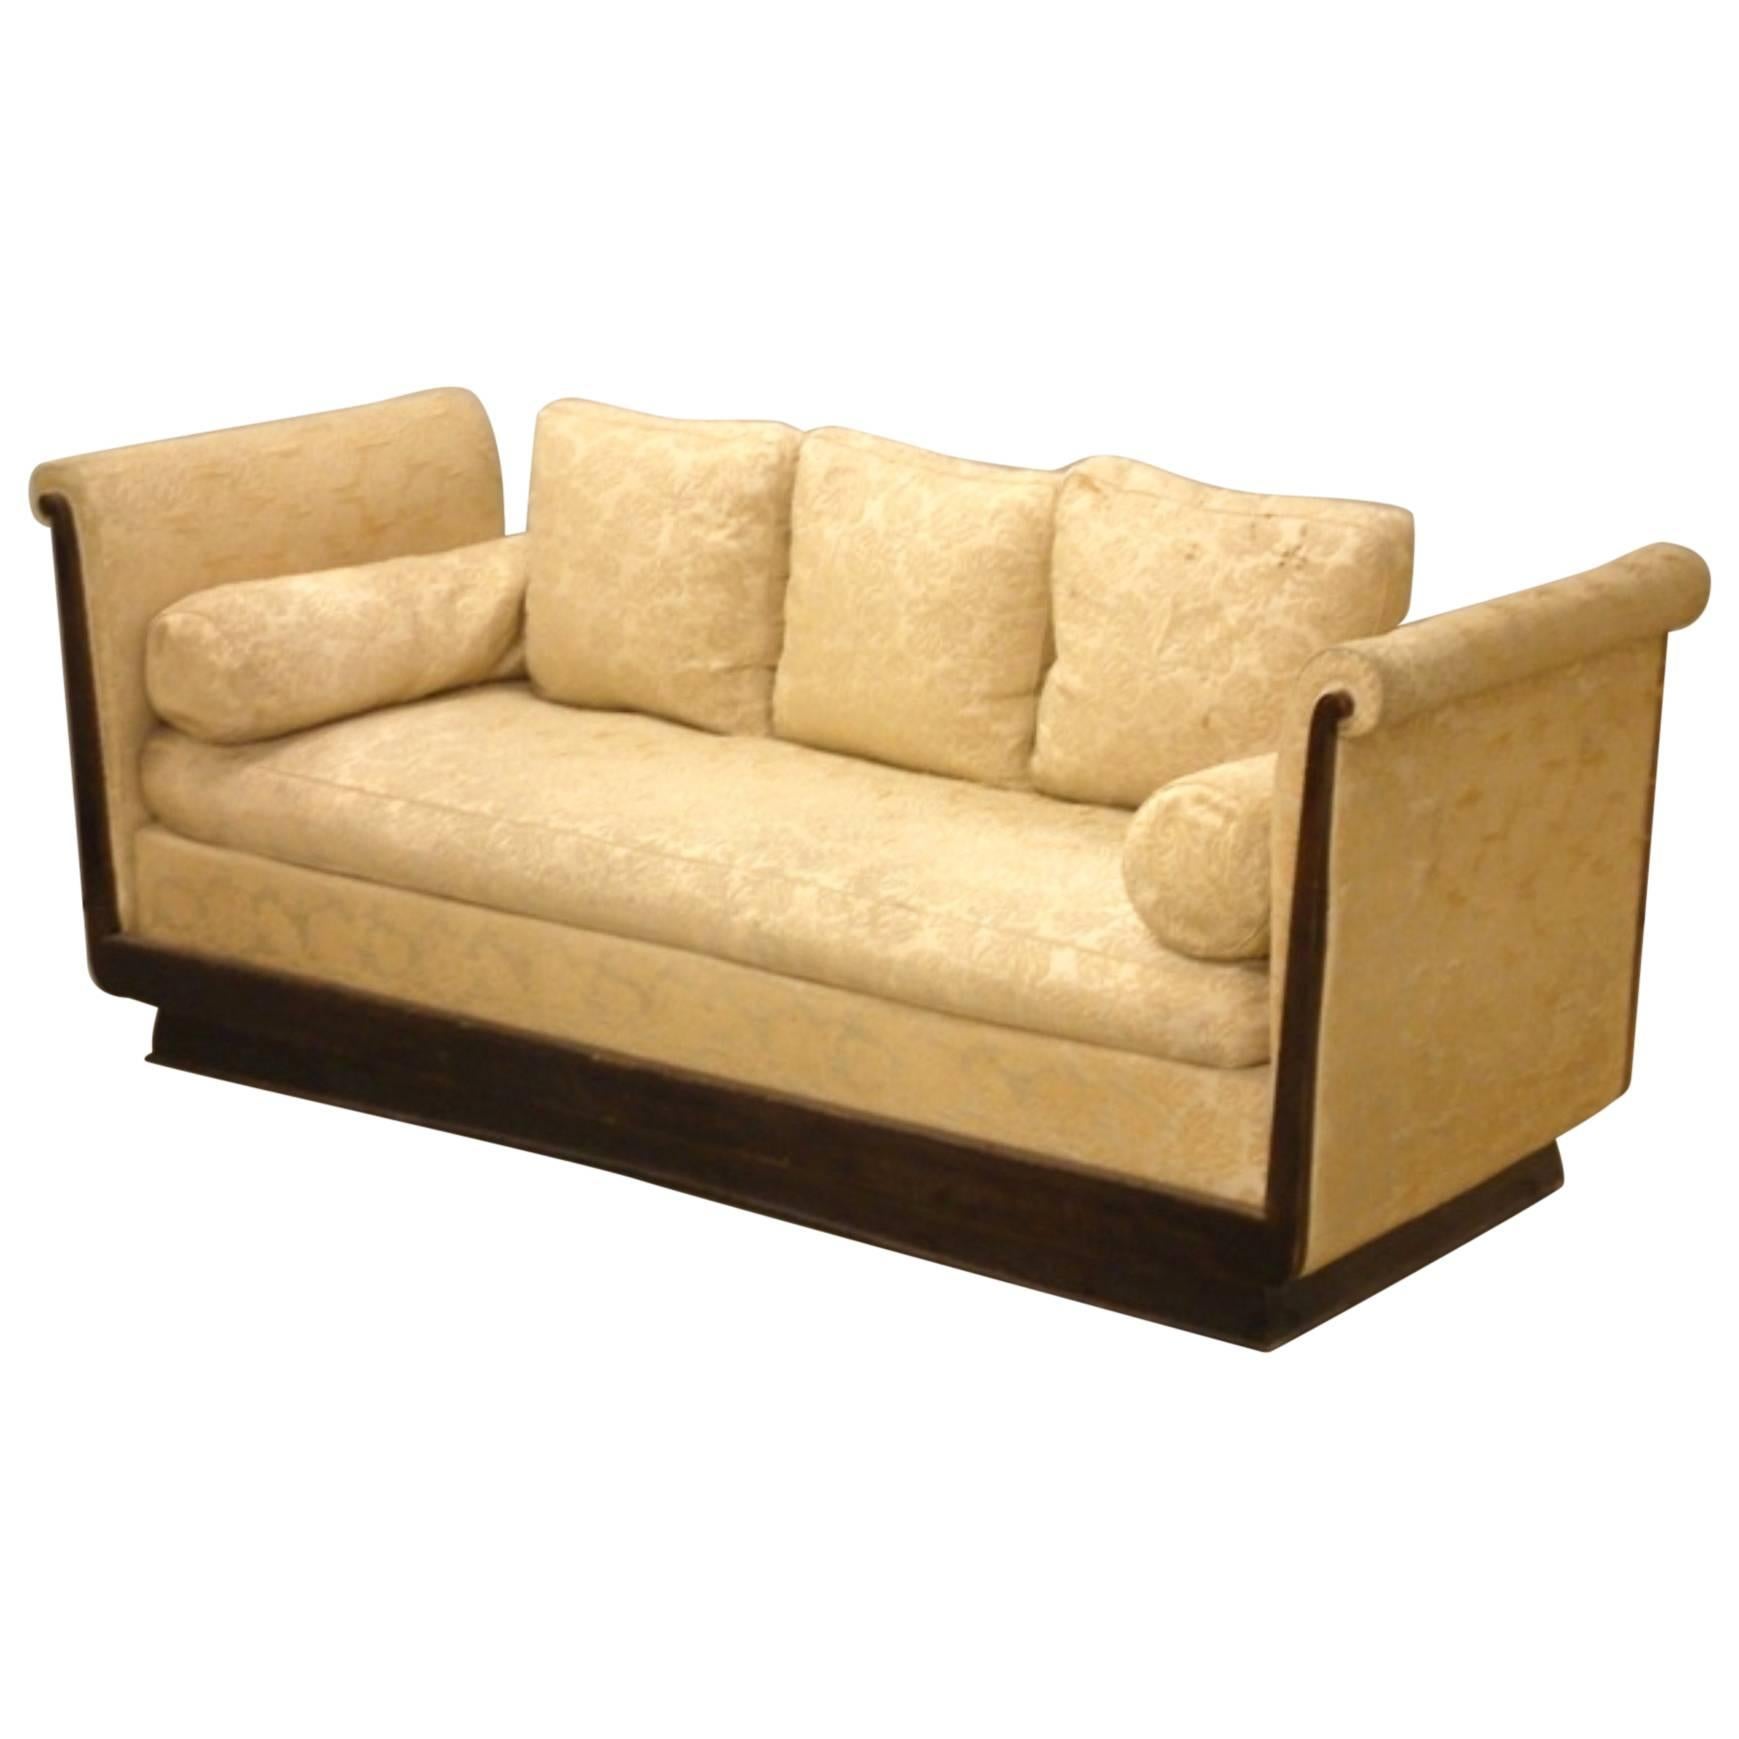 Dominique Meridian, Daybed or Sofa For Sale